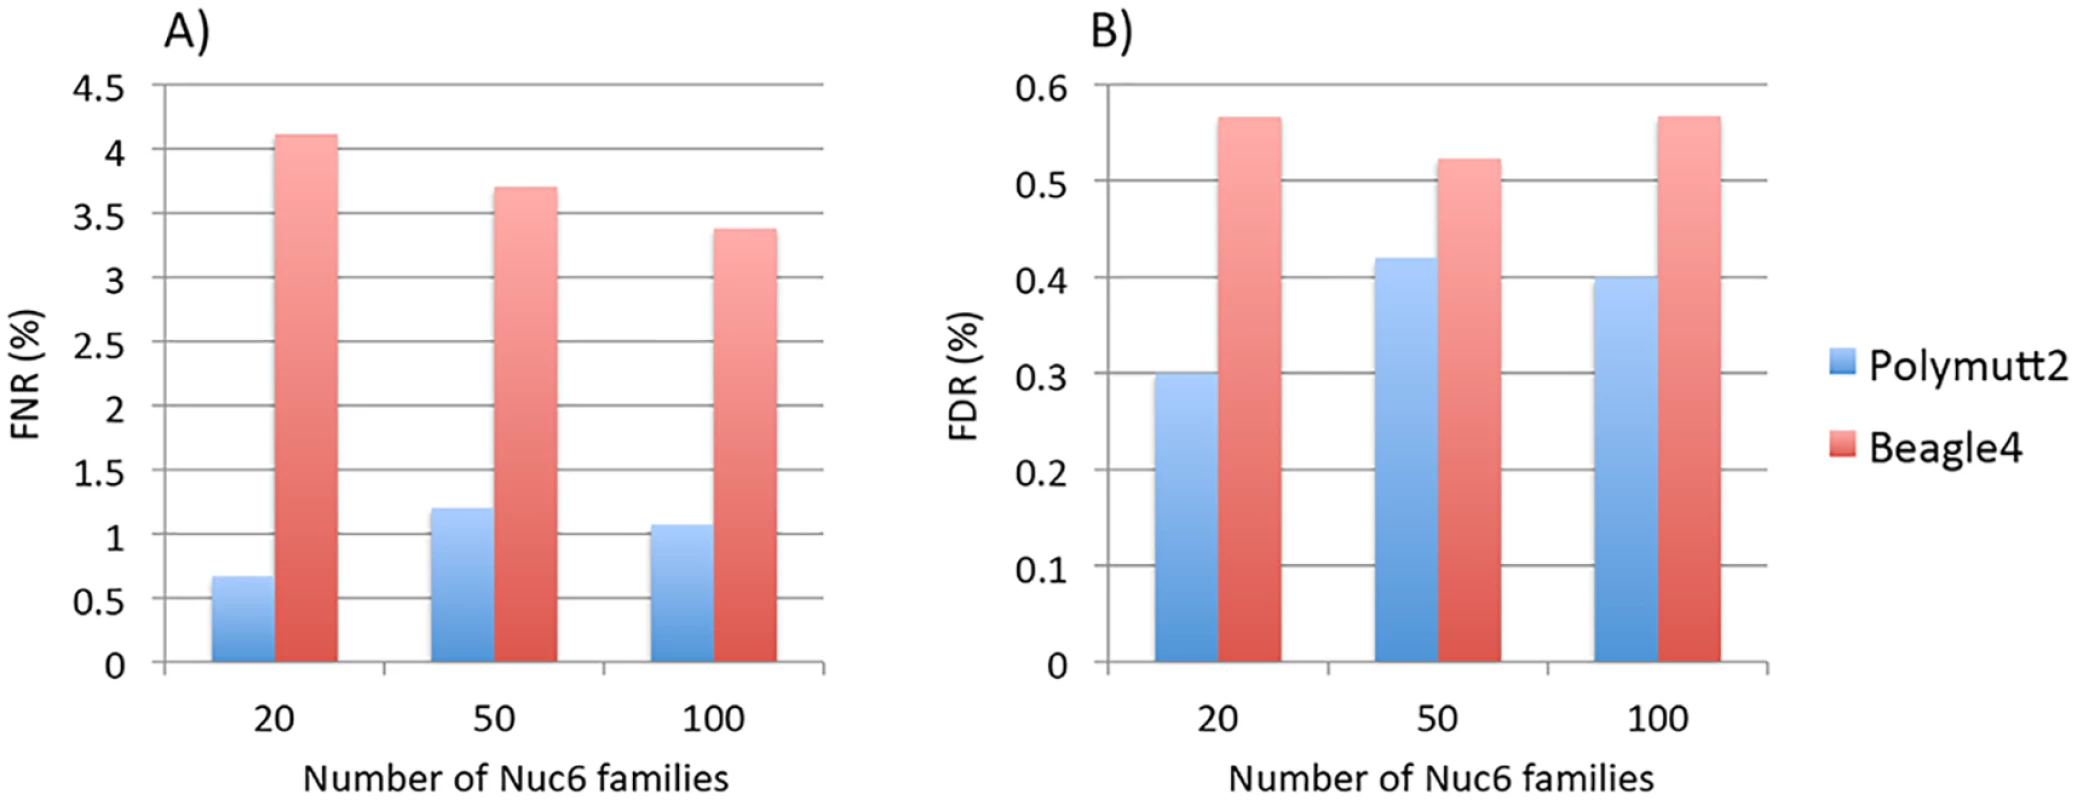 The FNR (%) in Panel A) and FDR (%) in Panel B) of heterozygous genotypes at variant sites with MAF&amp;lt;0.02 for Polymutt2 and Beagle4 calls for different numbers of simulated Nuc6 pedigrees at 10X coverage.